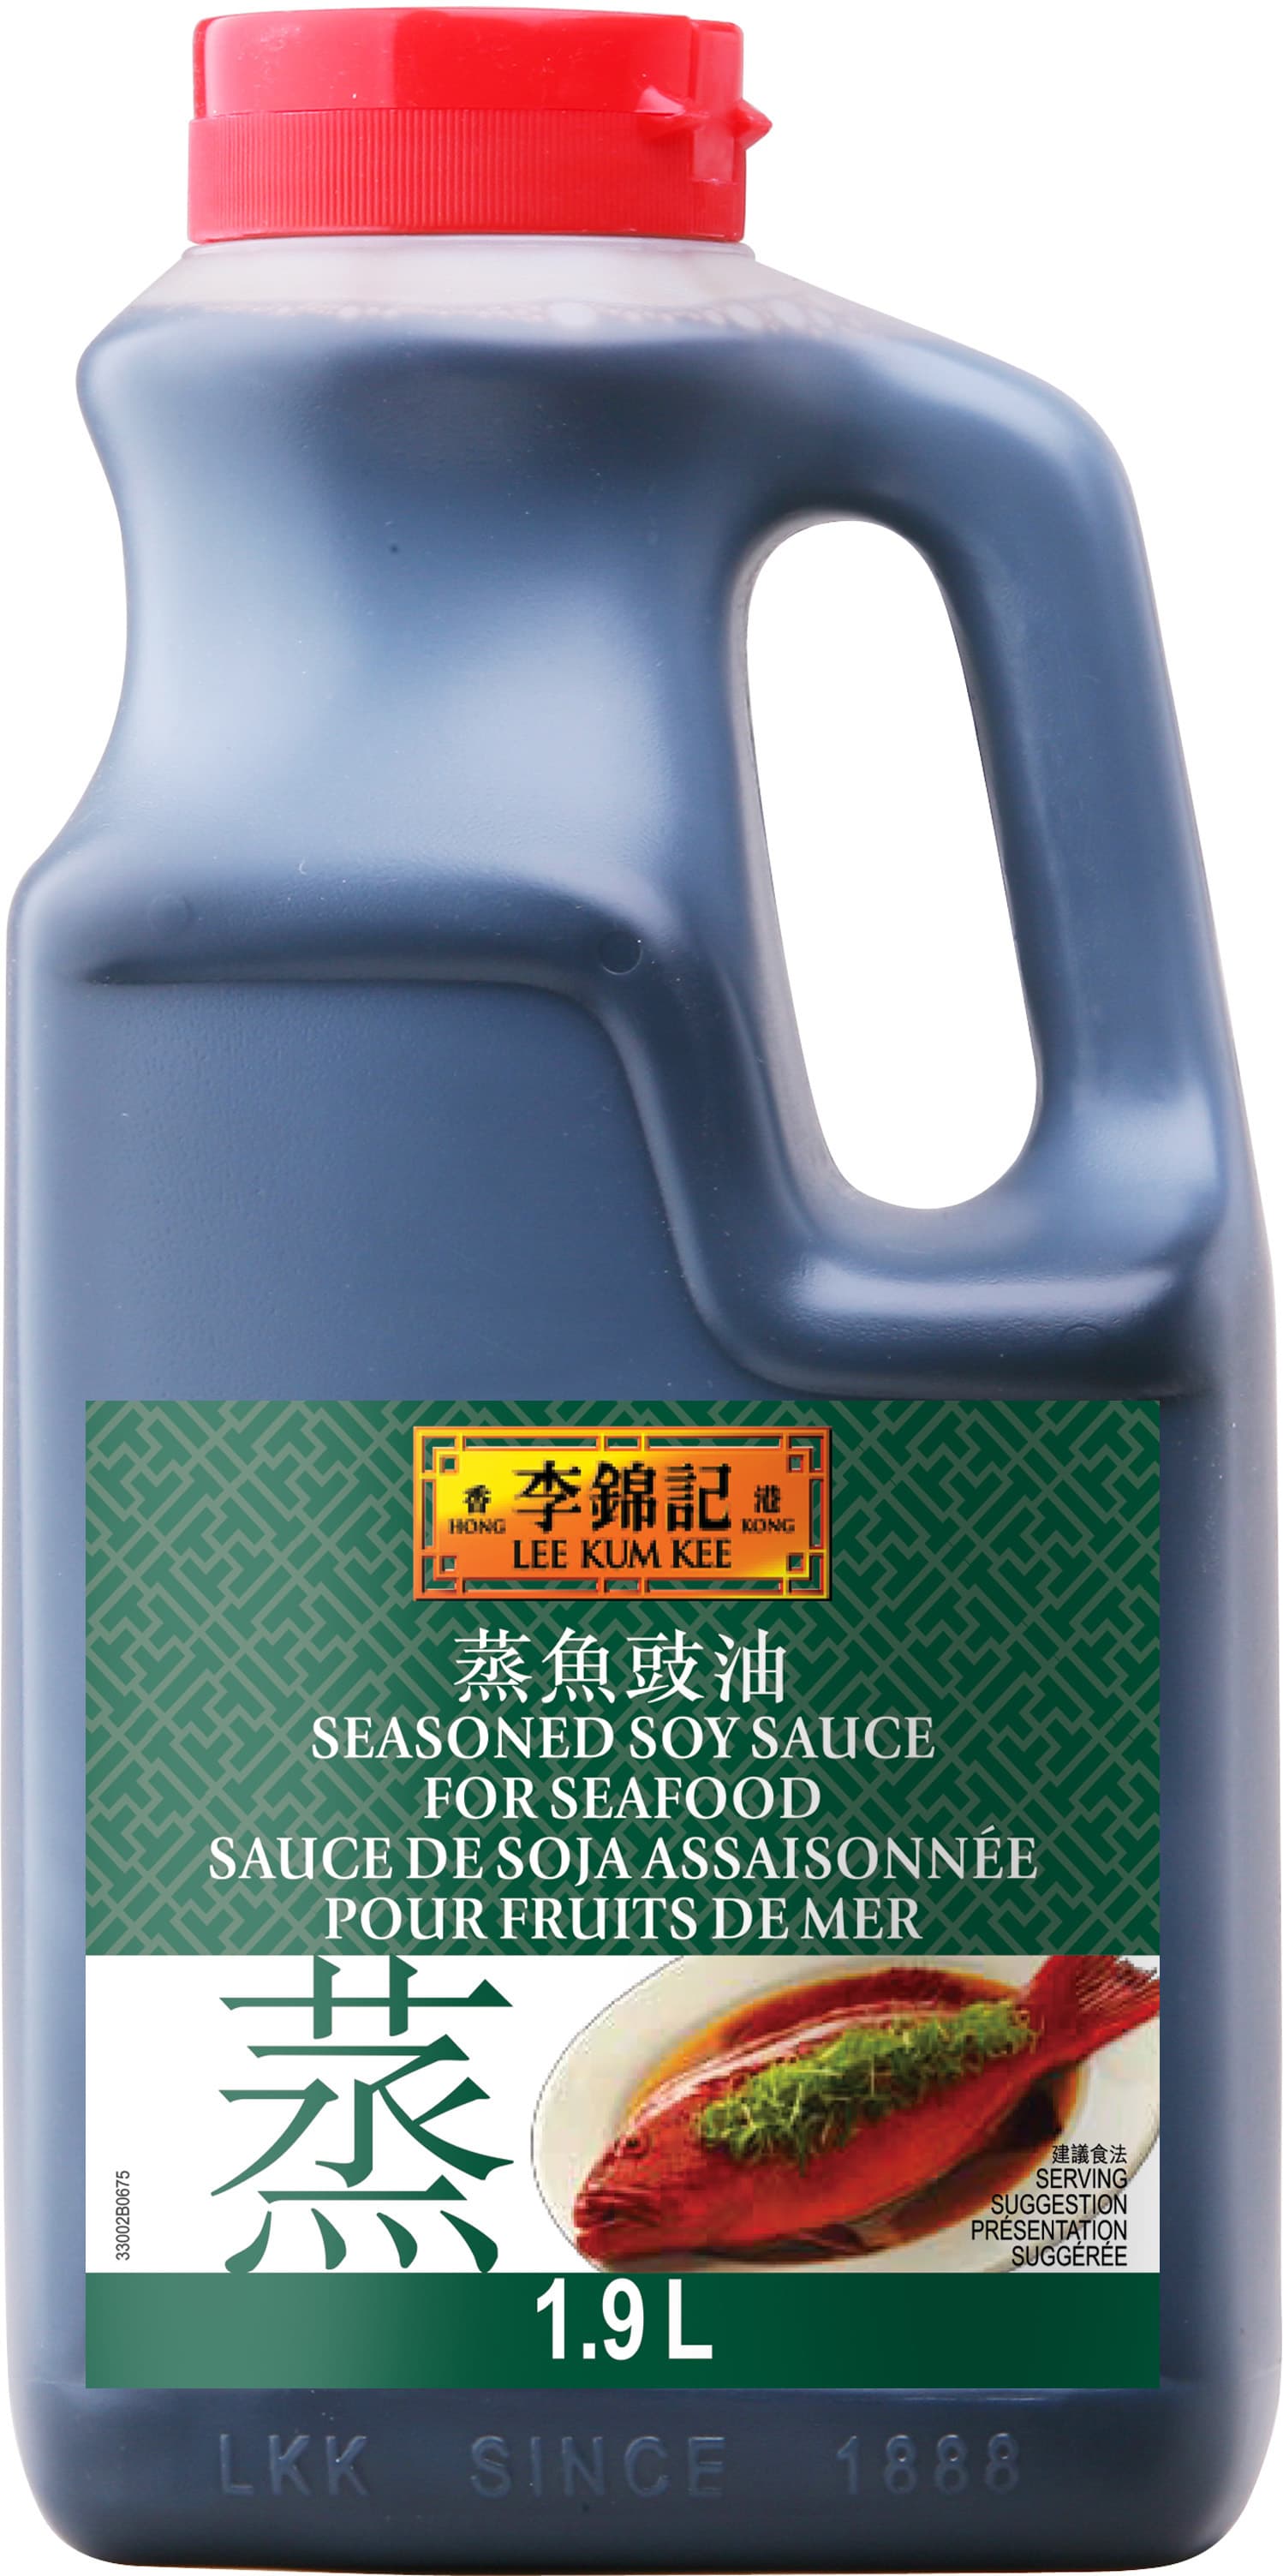 Seasoned Soy Sauce for Seafood 1.9L